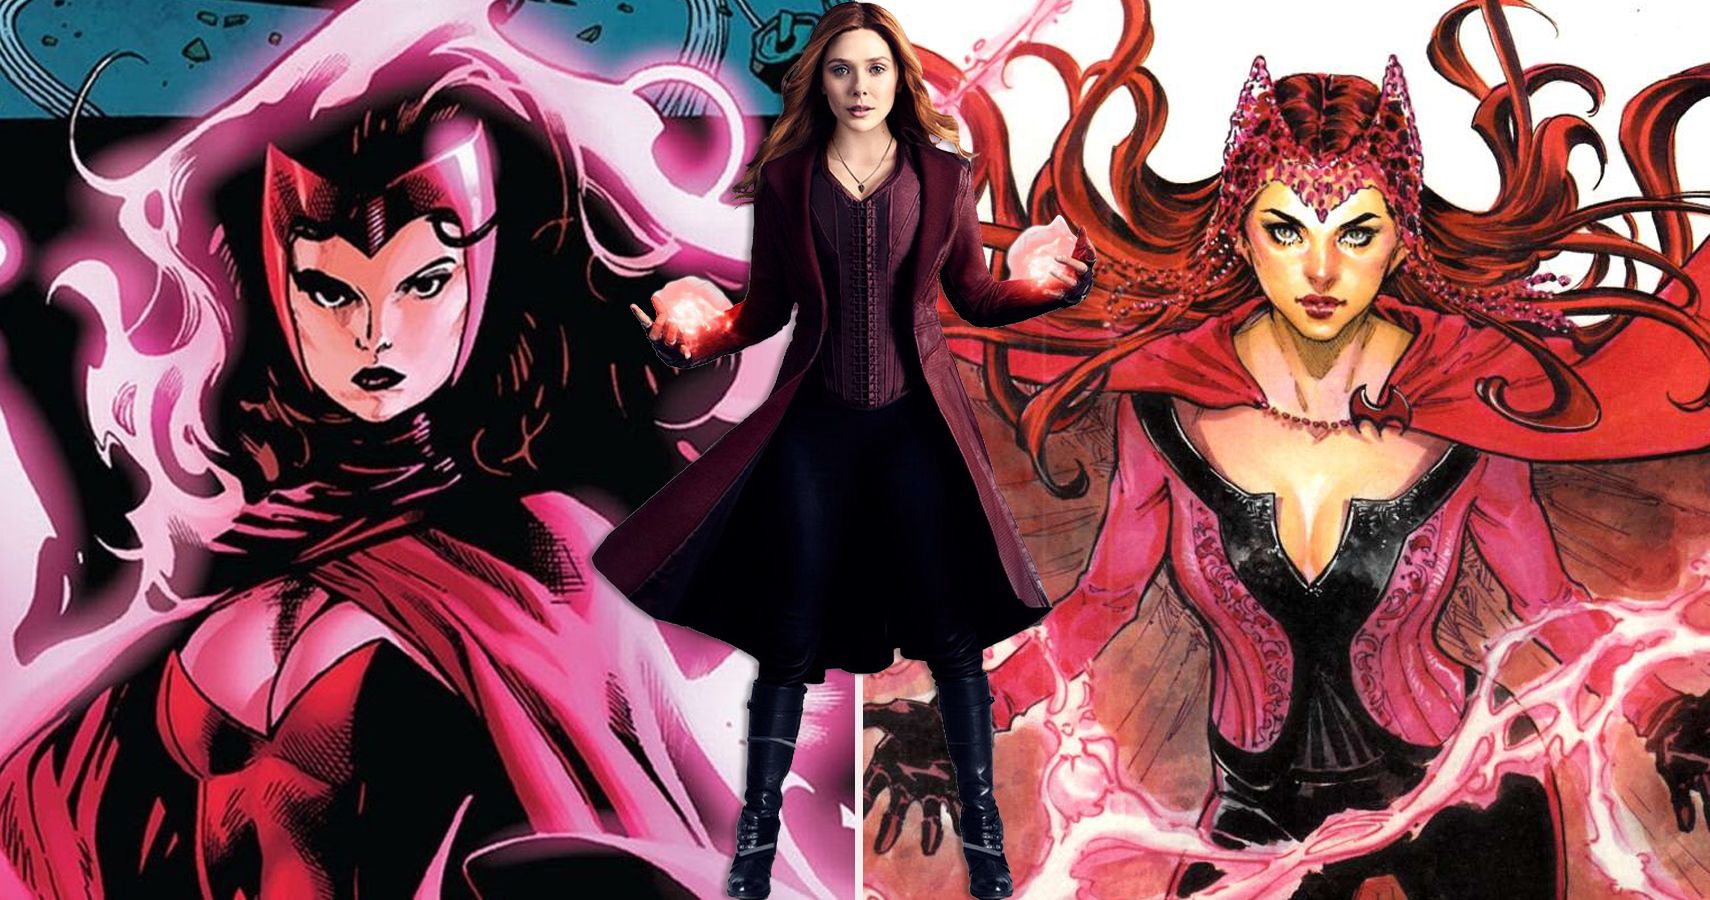 Scarlet Witch (2015) #8, Comic Issues